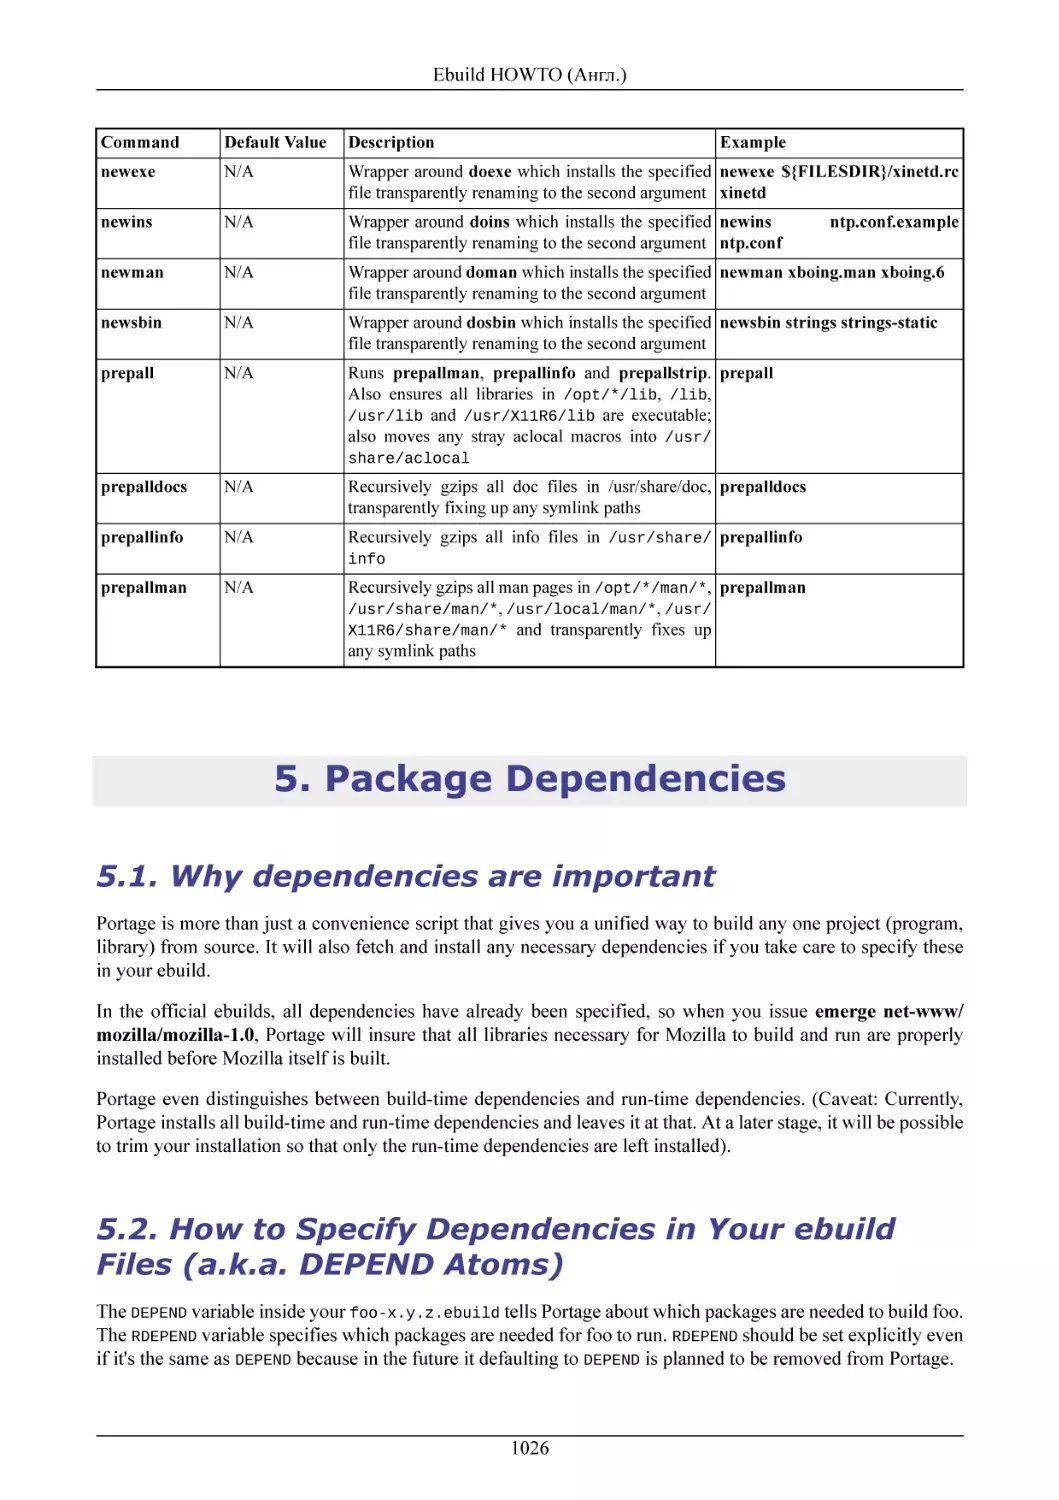 Package Dependencies
Why dependencies are important
How to Specify Dependencies in Your ebuild Files